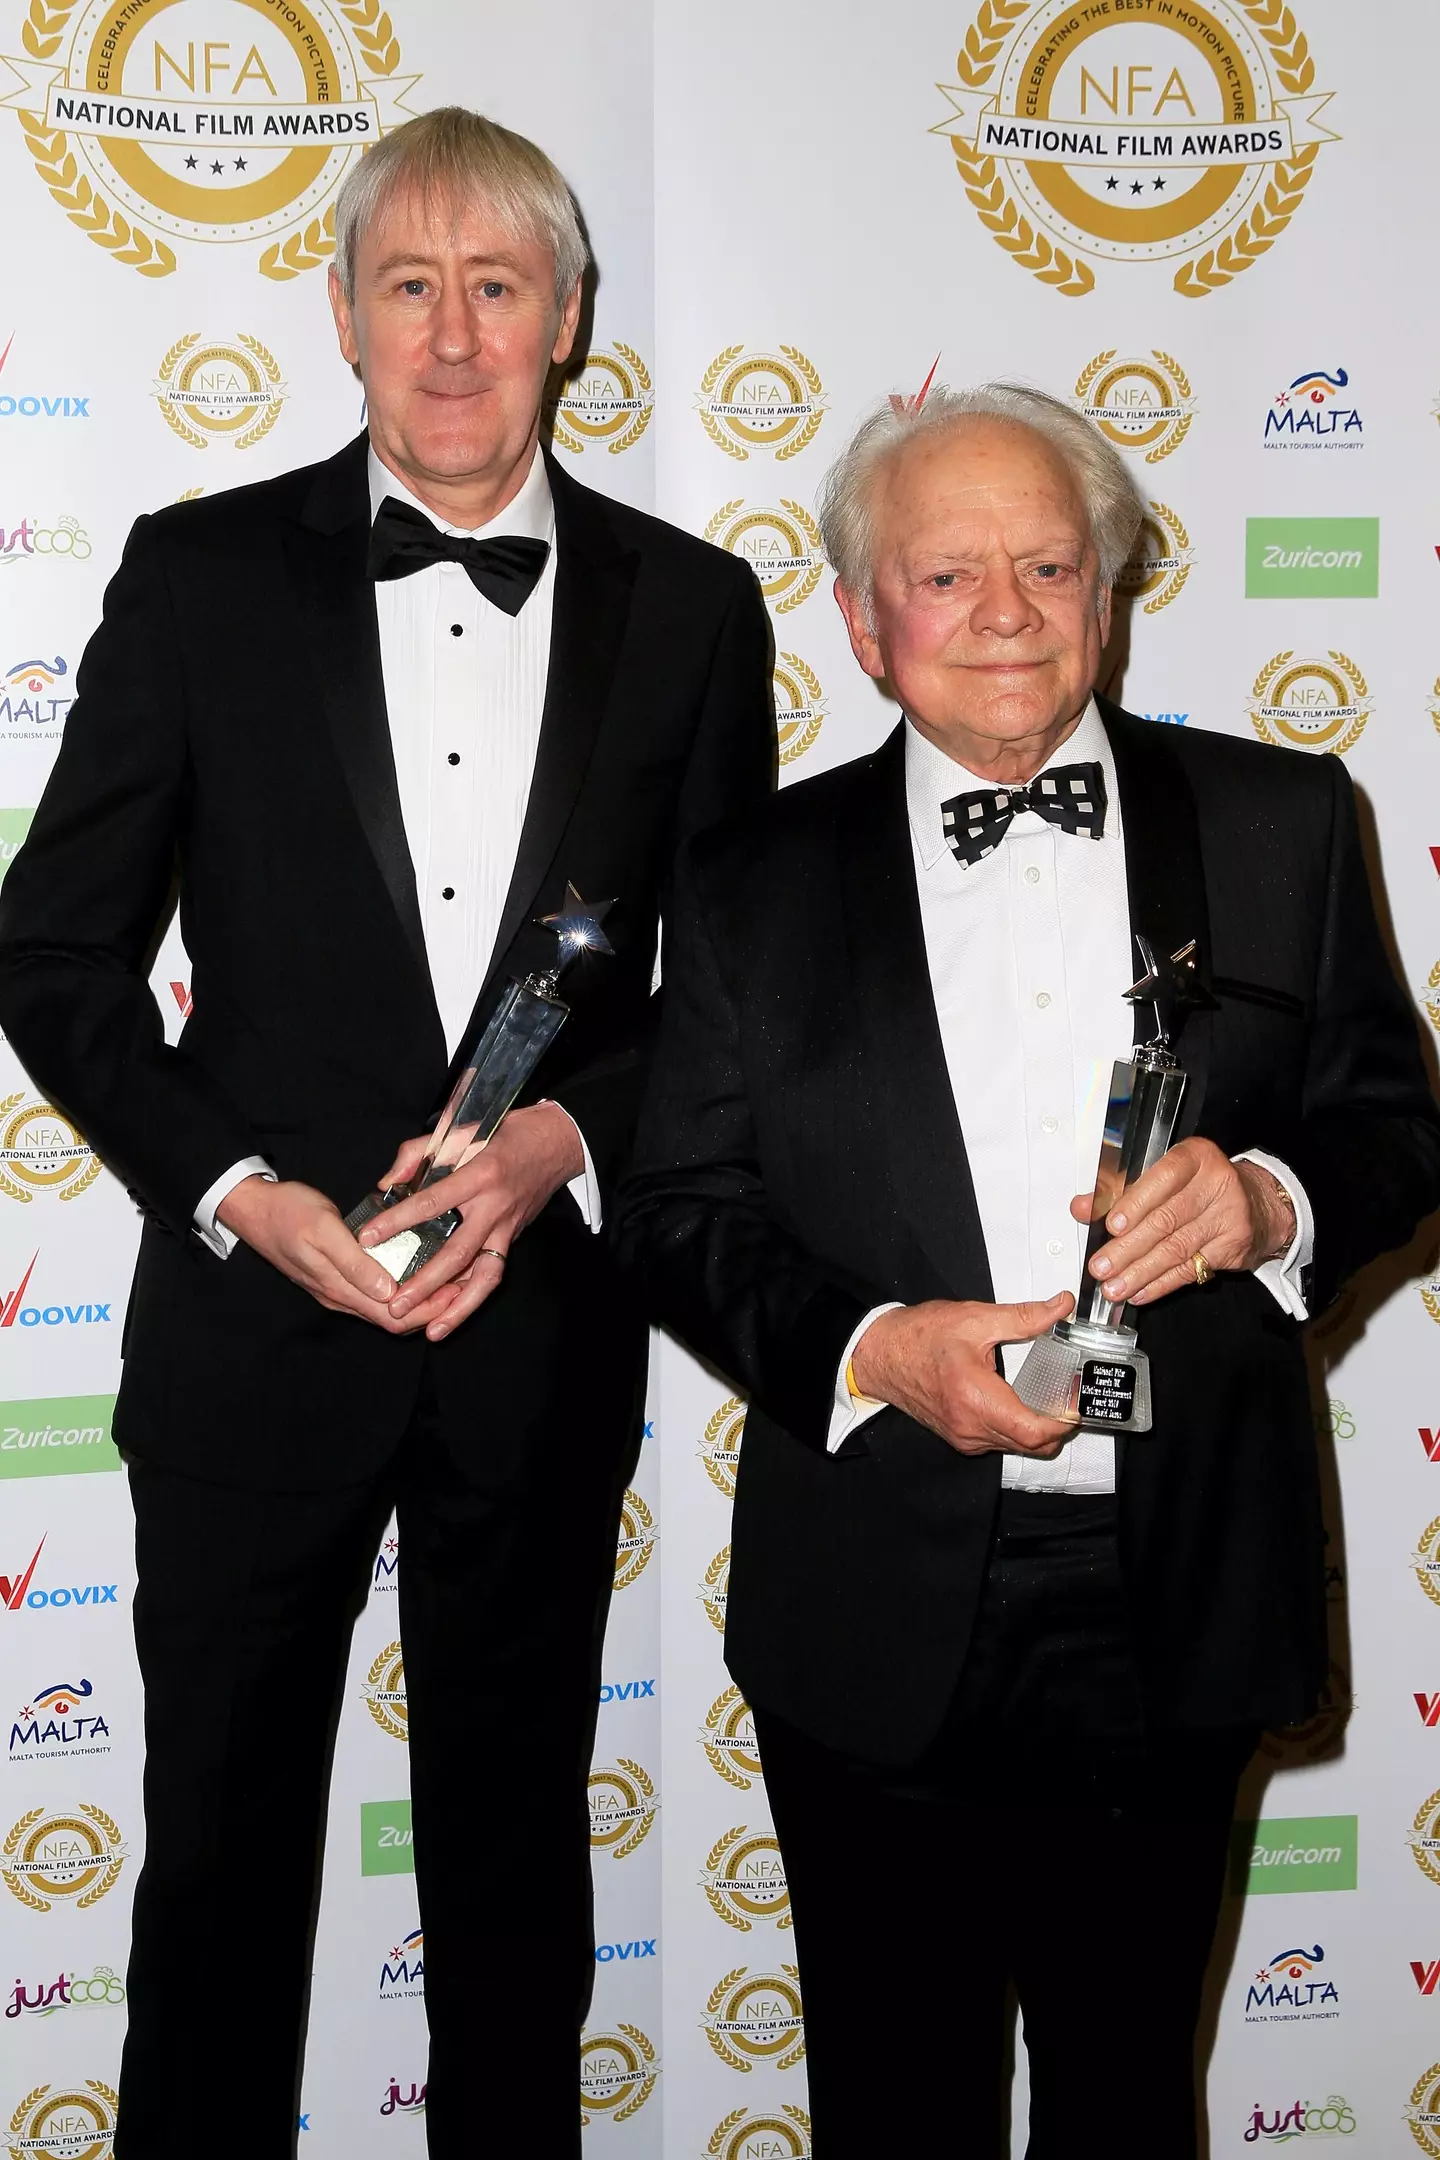 Sir David Jason stepped up to the mark to help his bereaved friend.